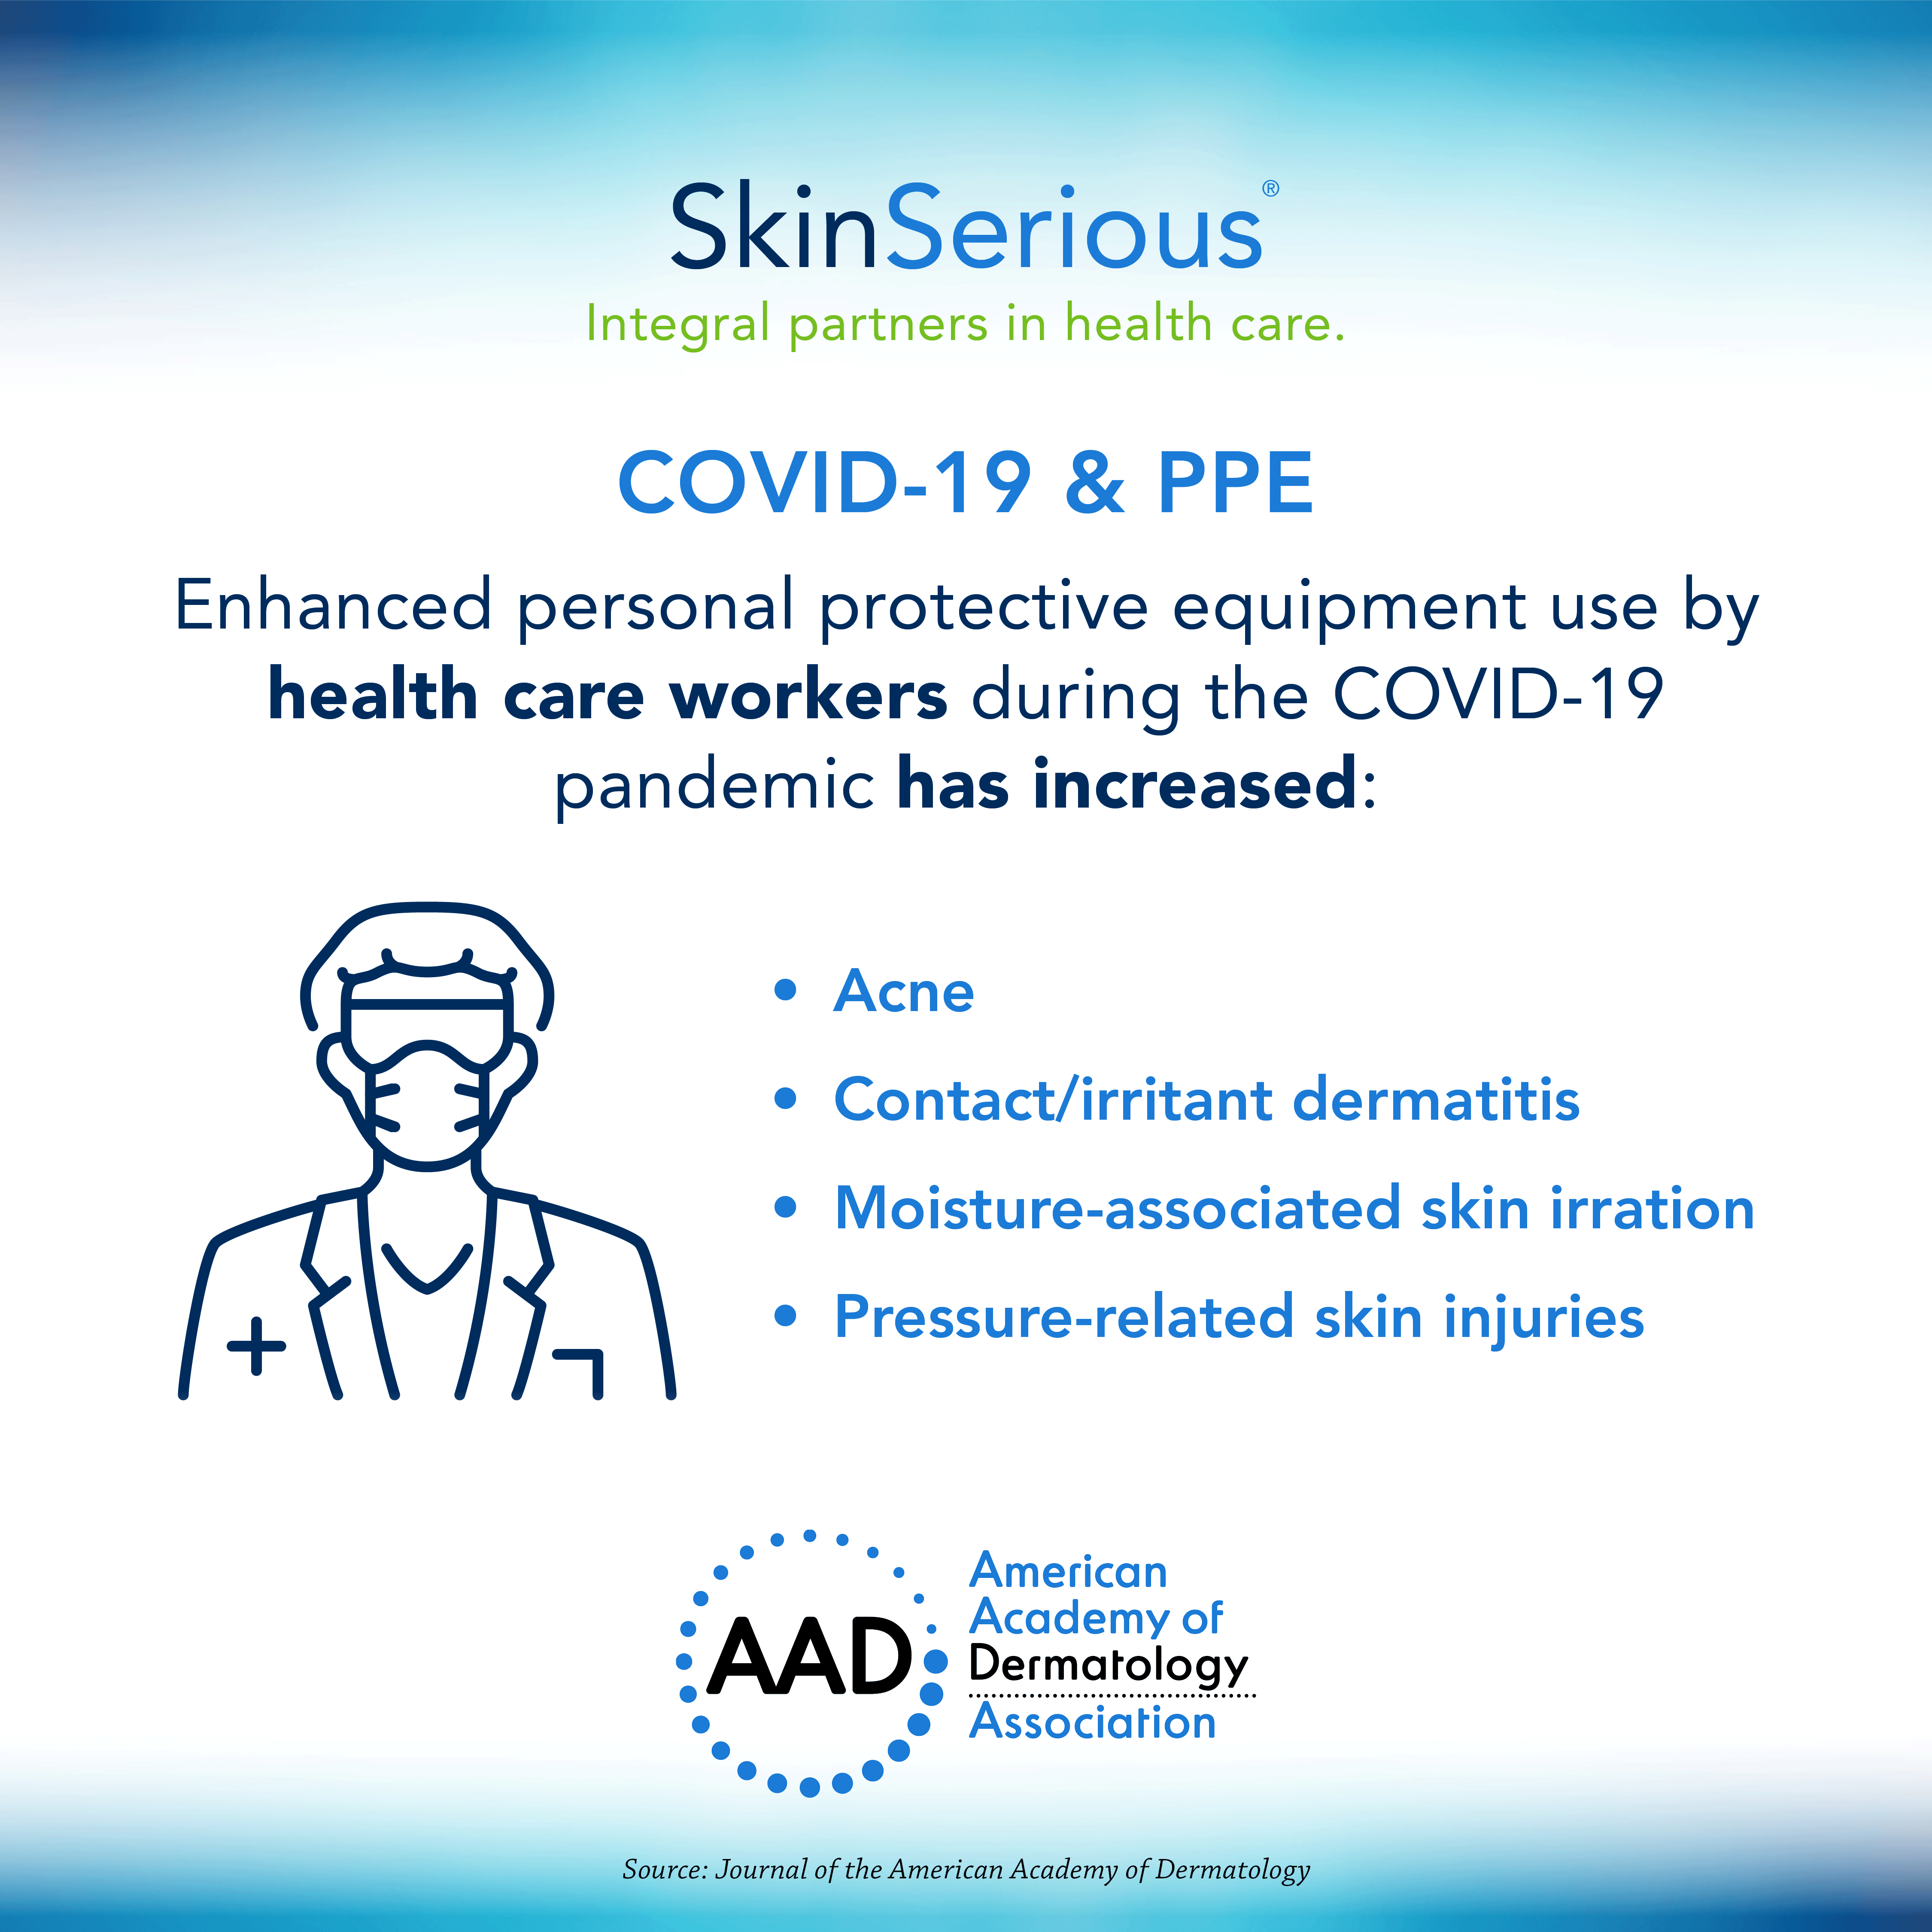 COVID-19 and PPE infographic